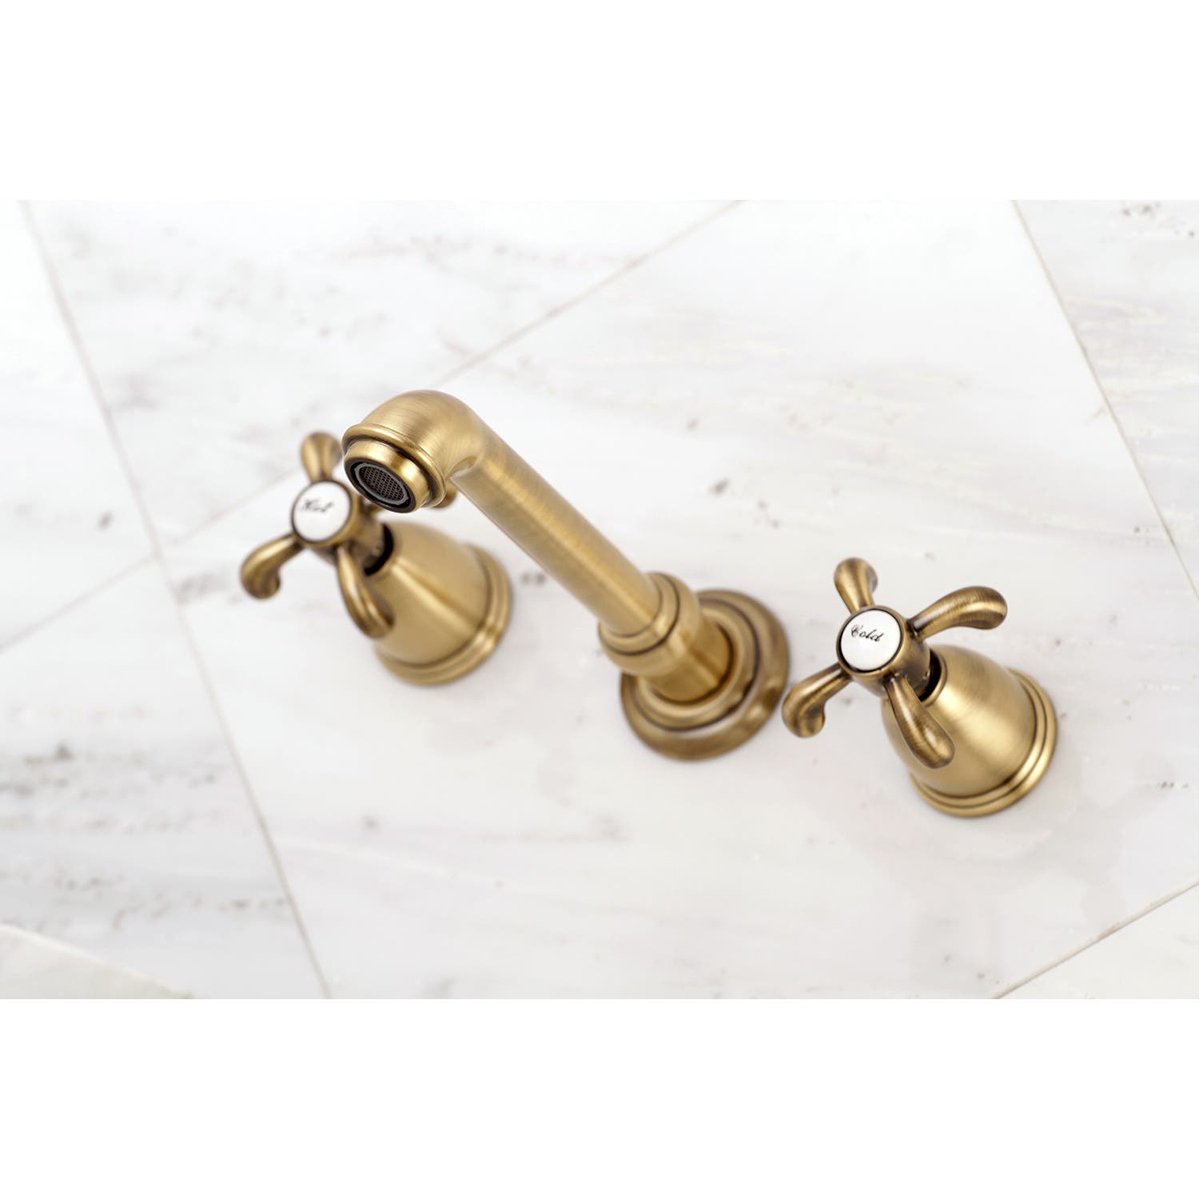 Kingston Brass French Country 2-Handle Wall Mount Roman Tub Faucet